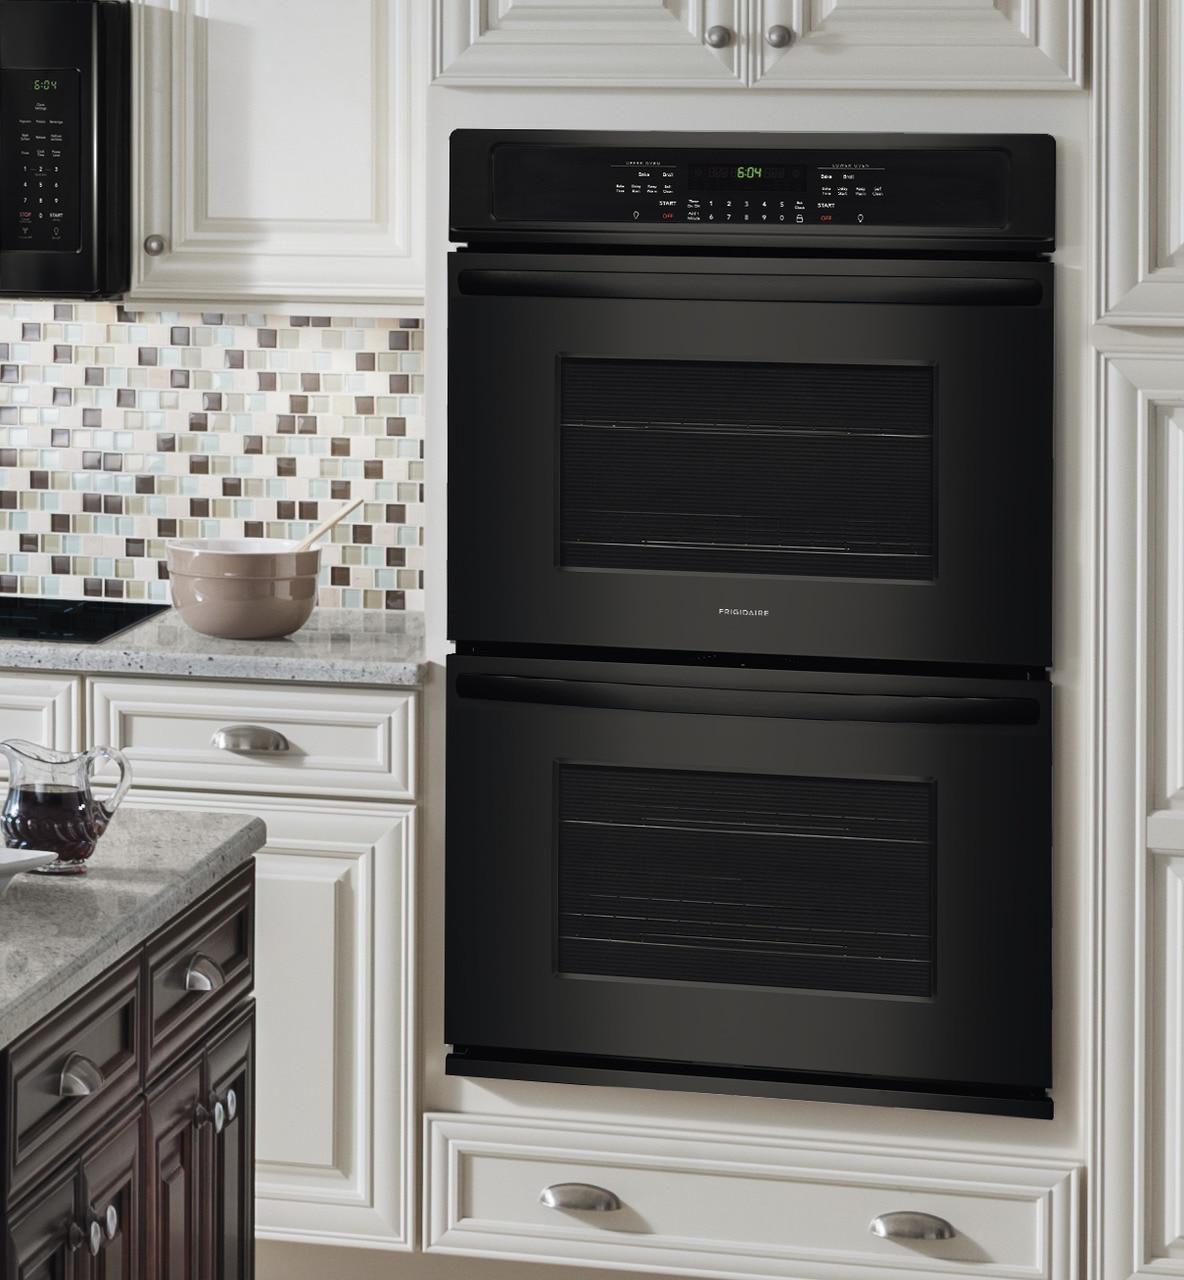 Frigidaire 30'' Double Electric Wall Oven